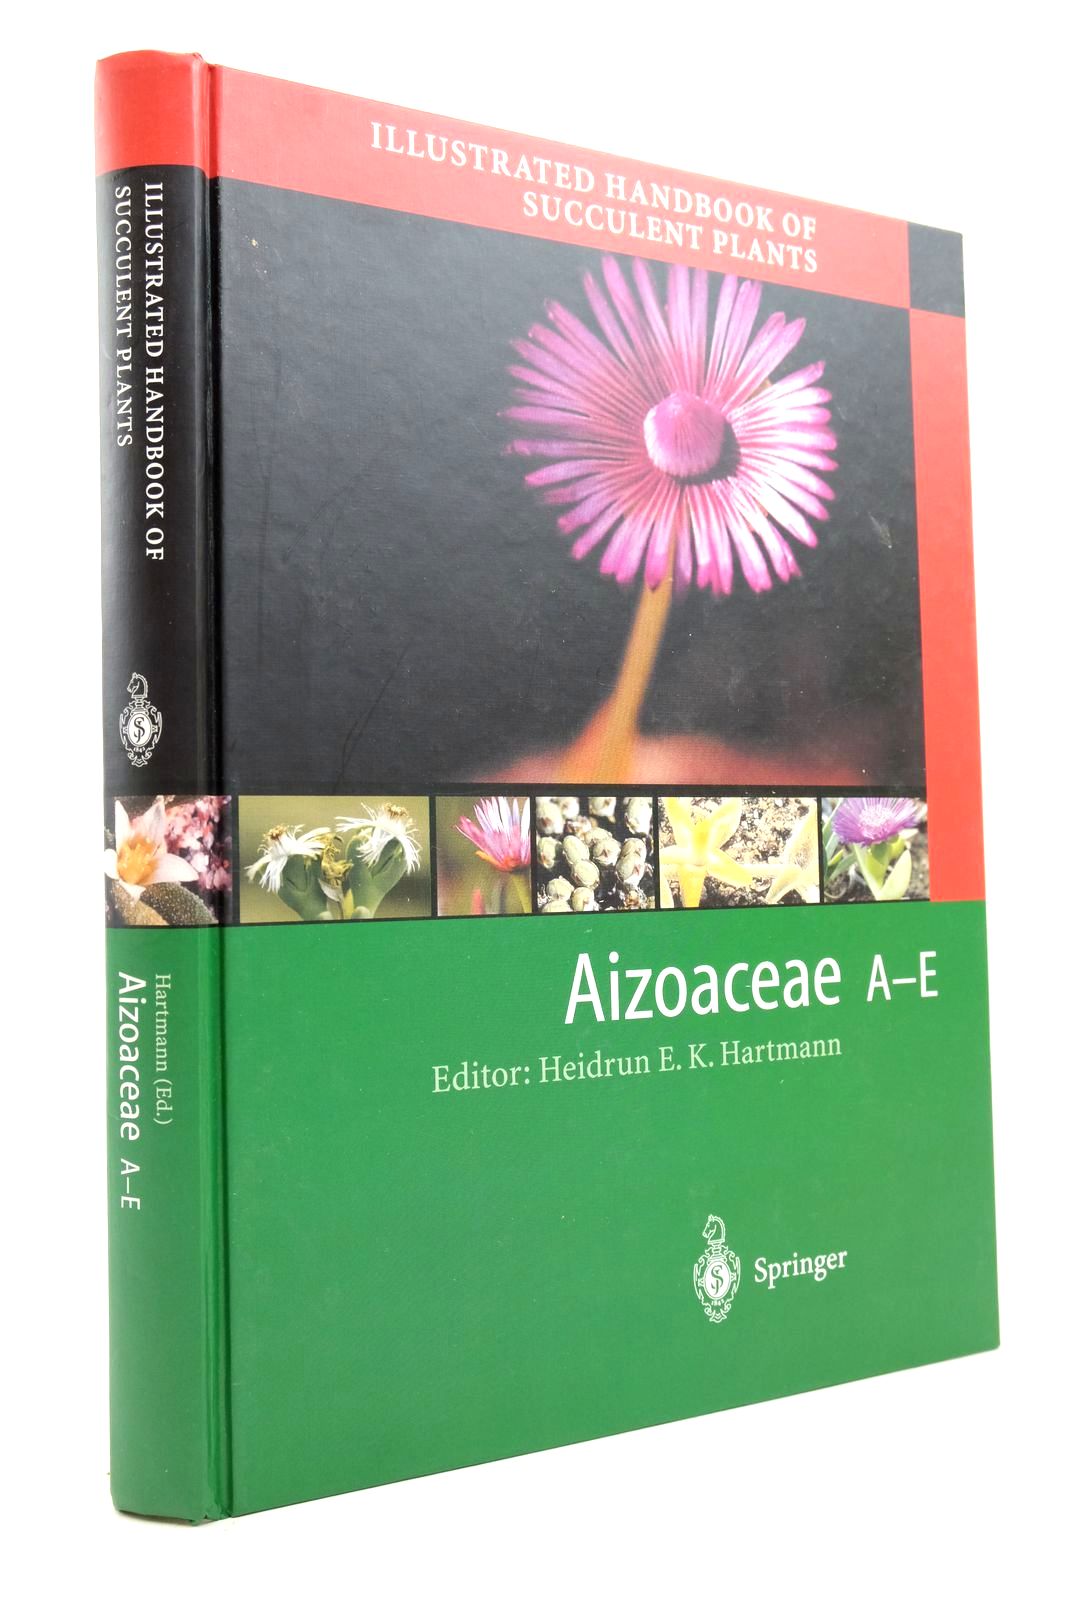 Photo of ILLUSTRATED HANDBOOK OF SUCCULENT PLANTS: AIZOACEAE A-E written by Hartmann, Heidrun E.K. published by Springer-Verlag (STOCK CODE: 2139827)  for sale by Stella & Rose's Books